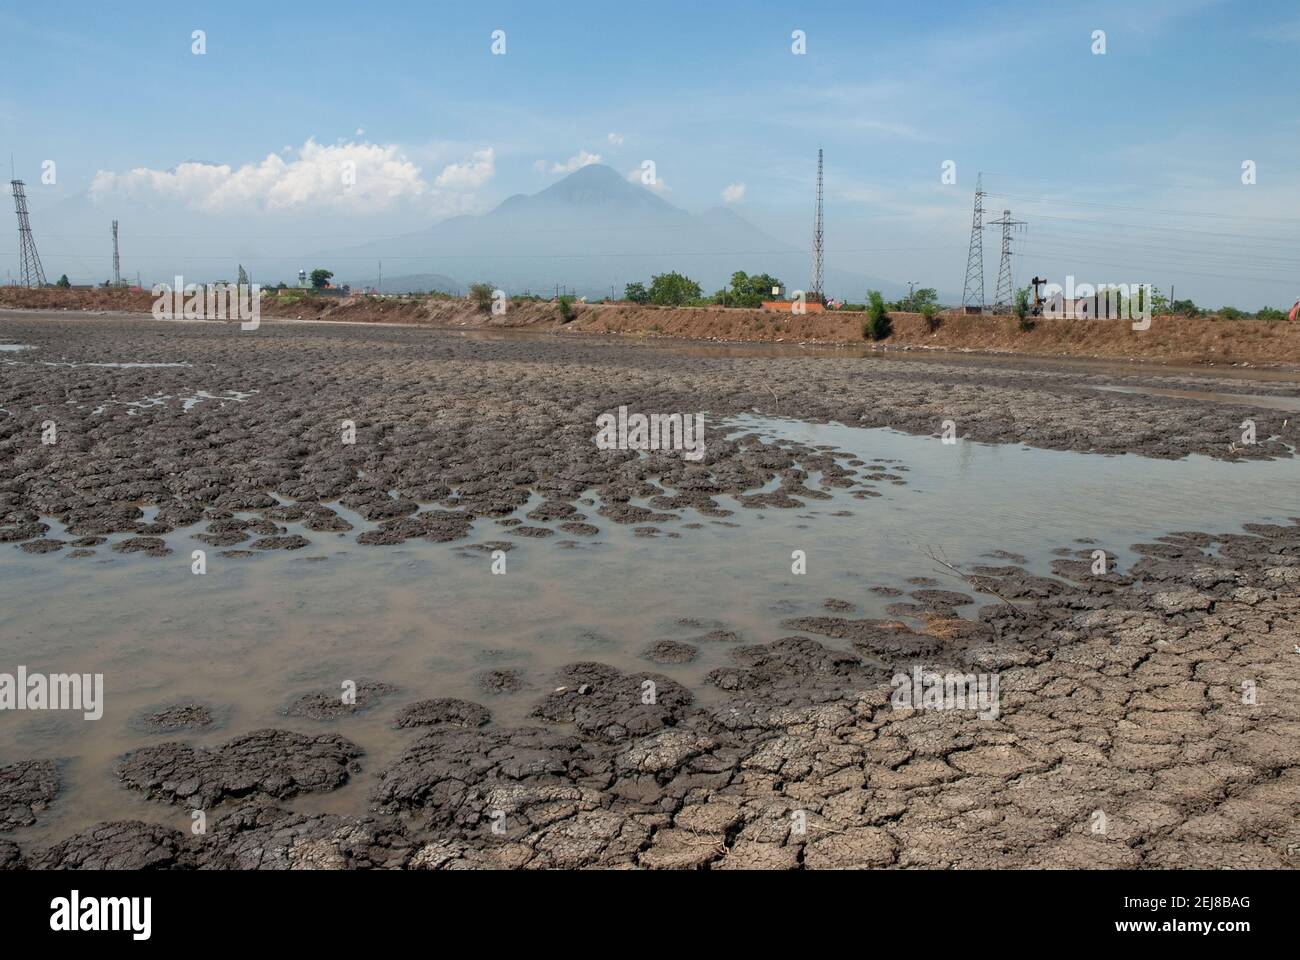 Mud lake environmental disaster which developed after drilling incident with volcano in background, Porong Sidoarjo, near Surabaya, East Java, Indones Stock Photo